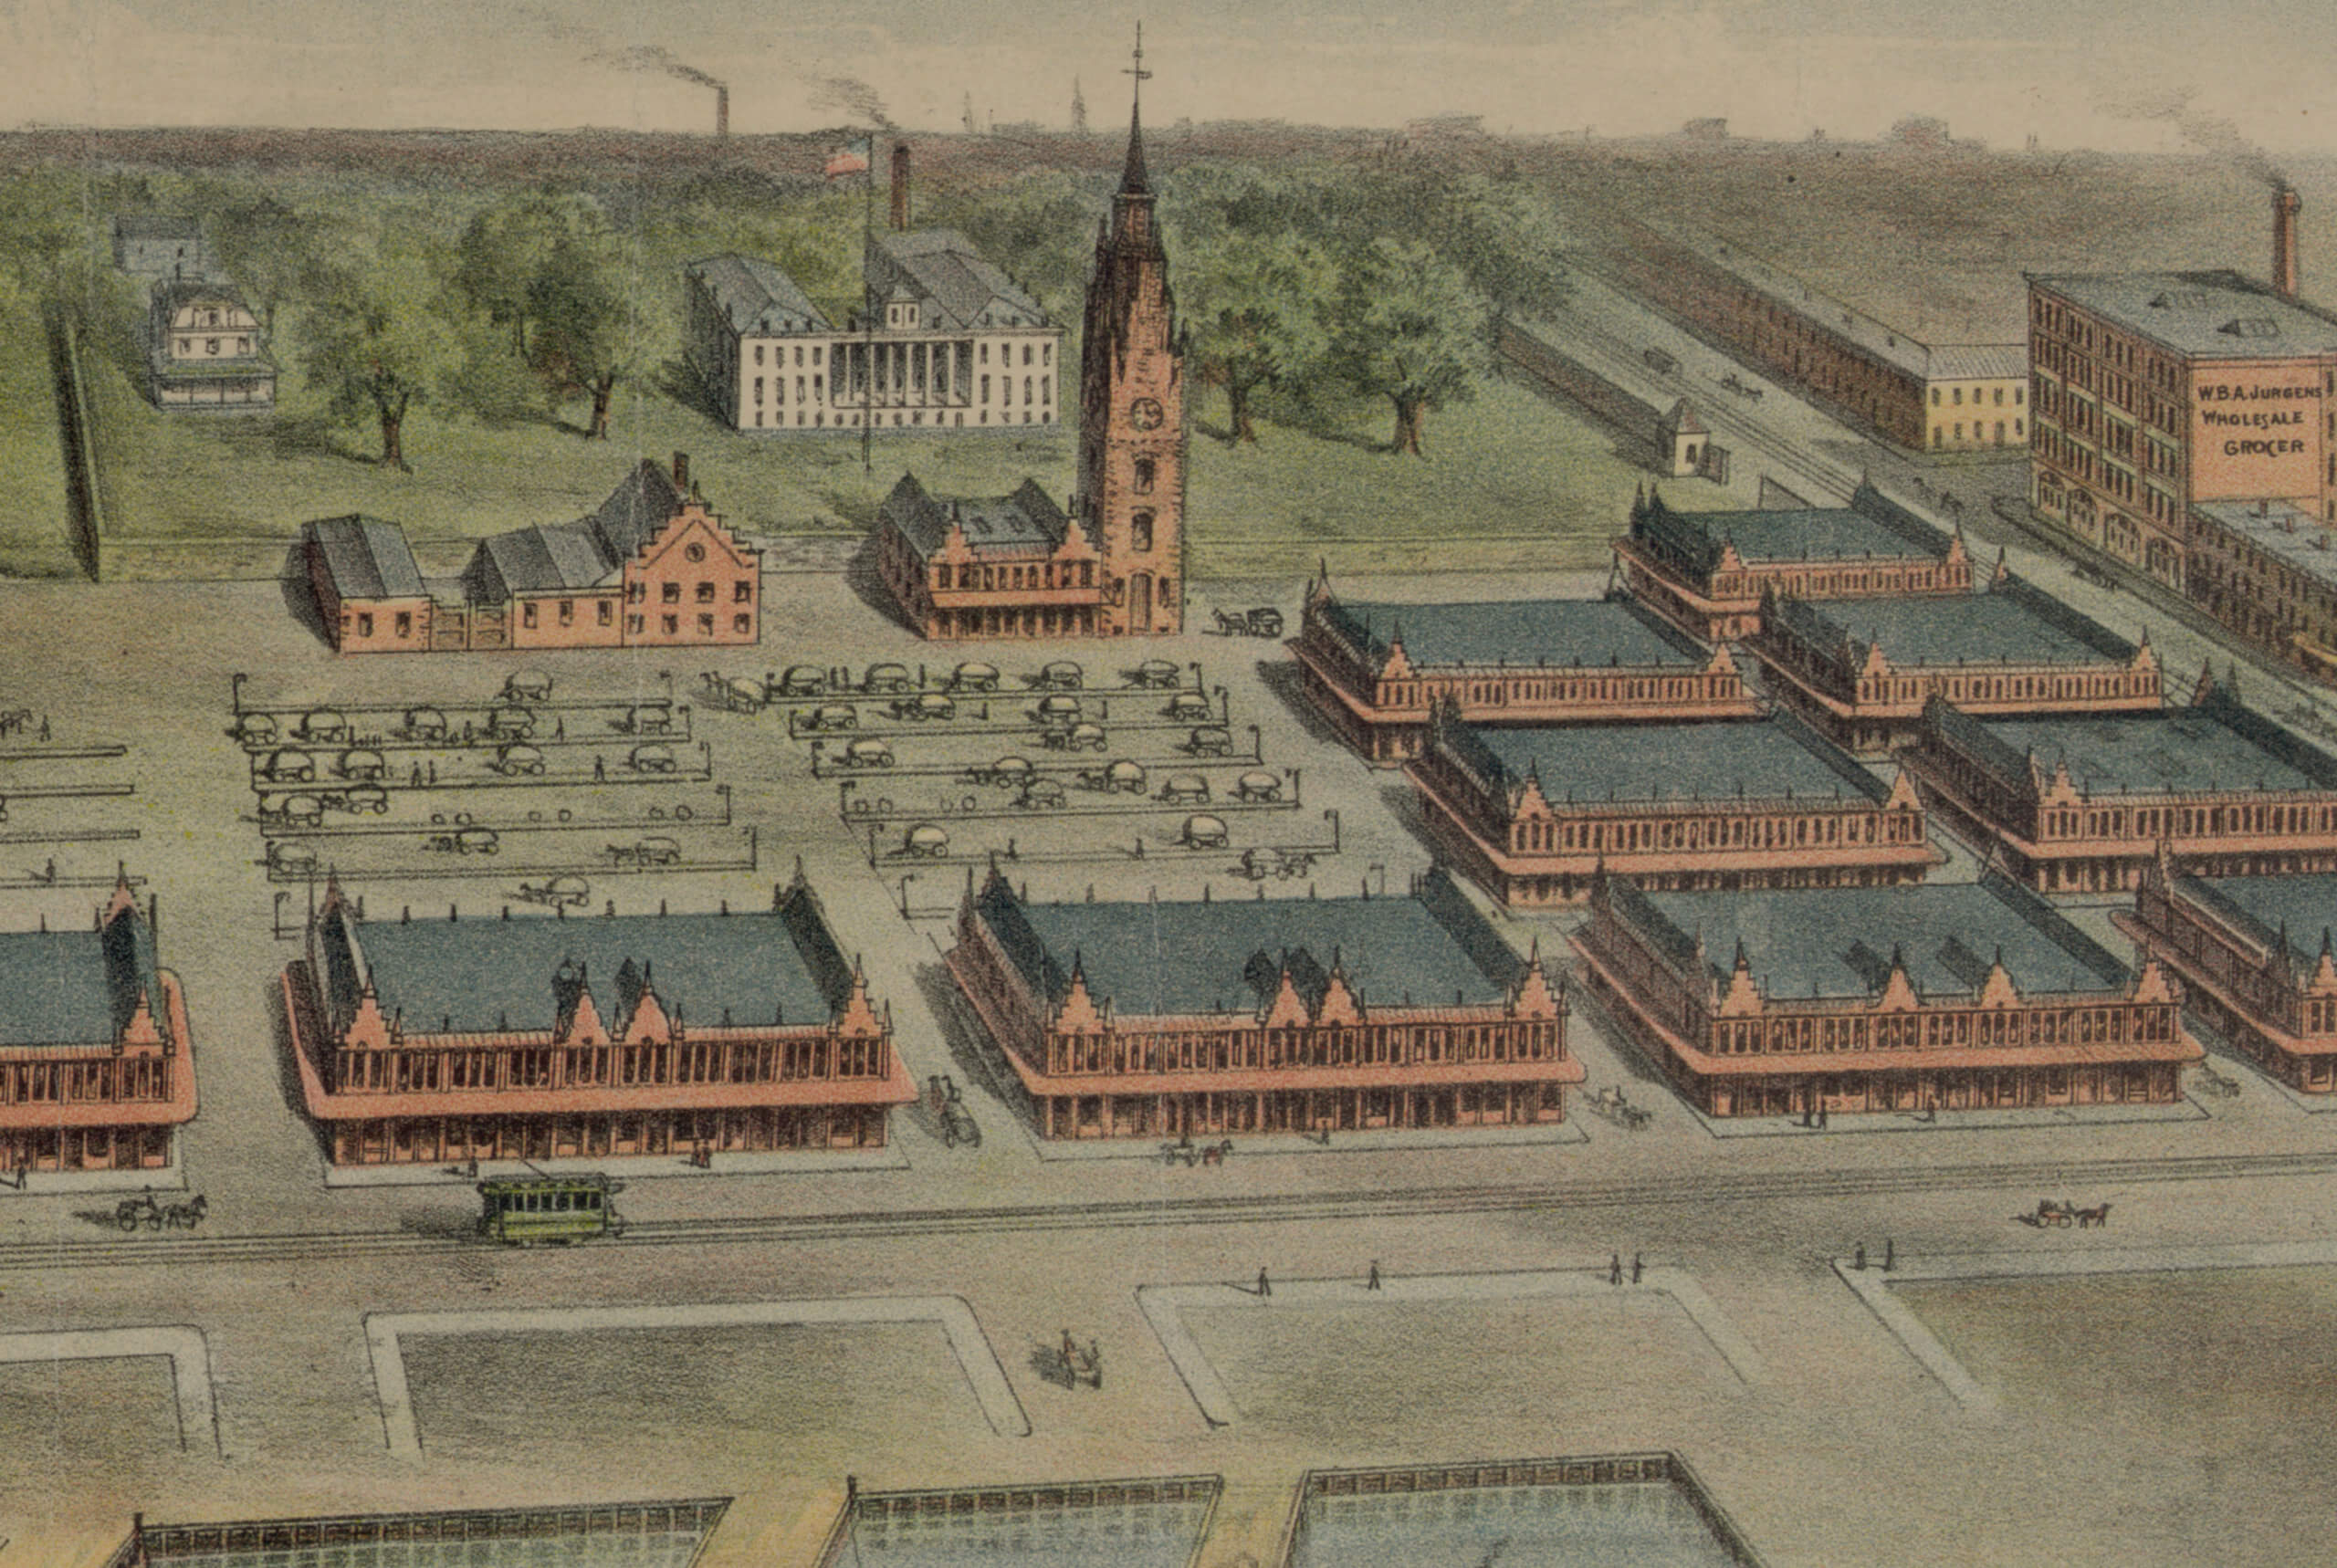 aerial view drawing of the market buildings